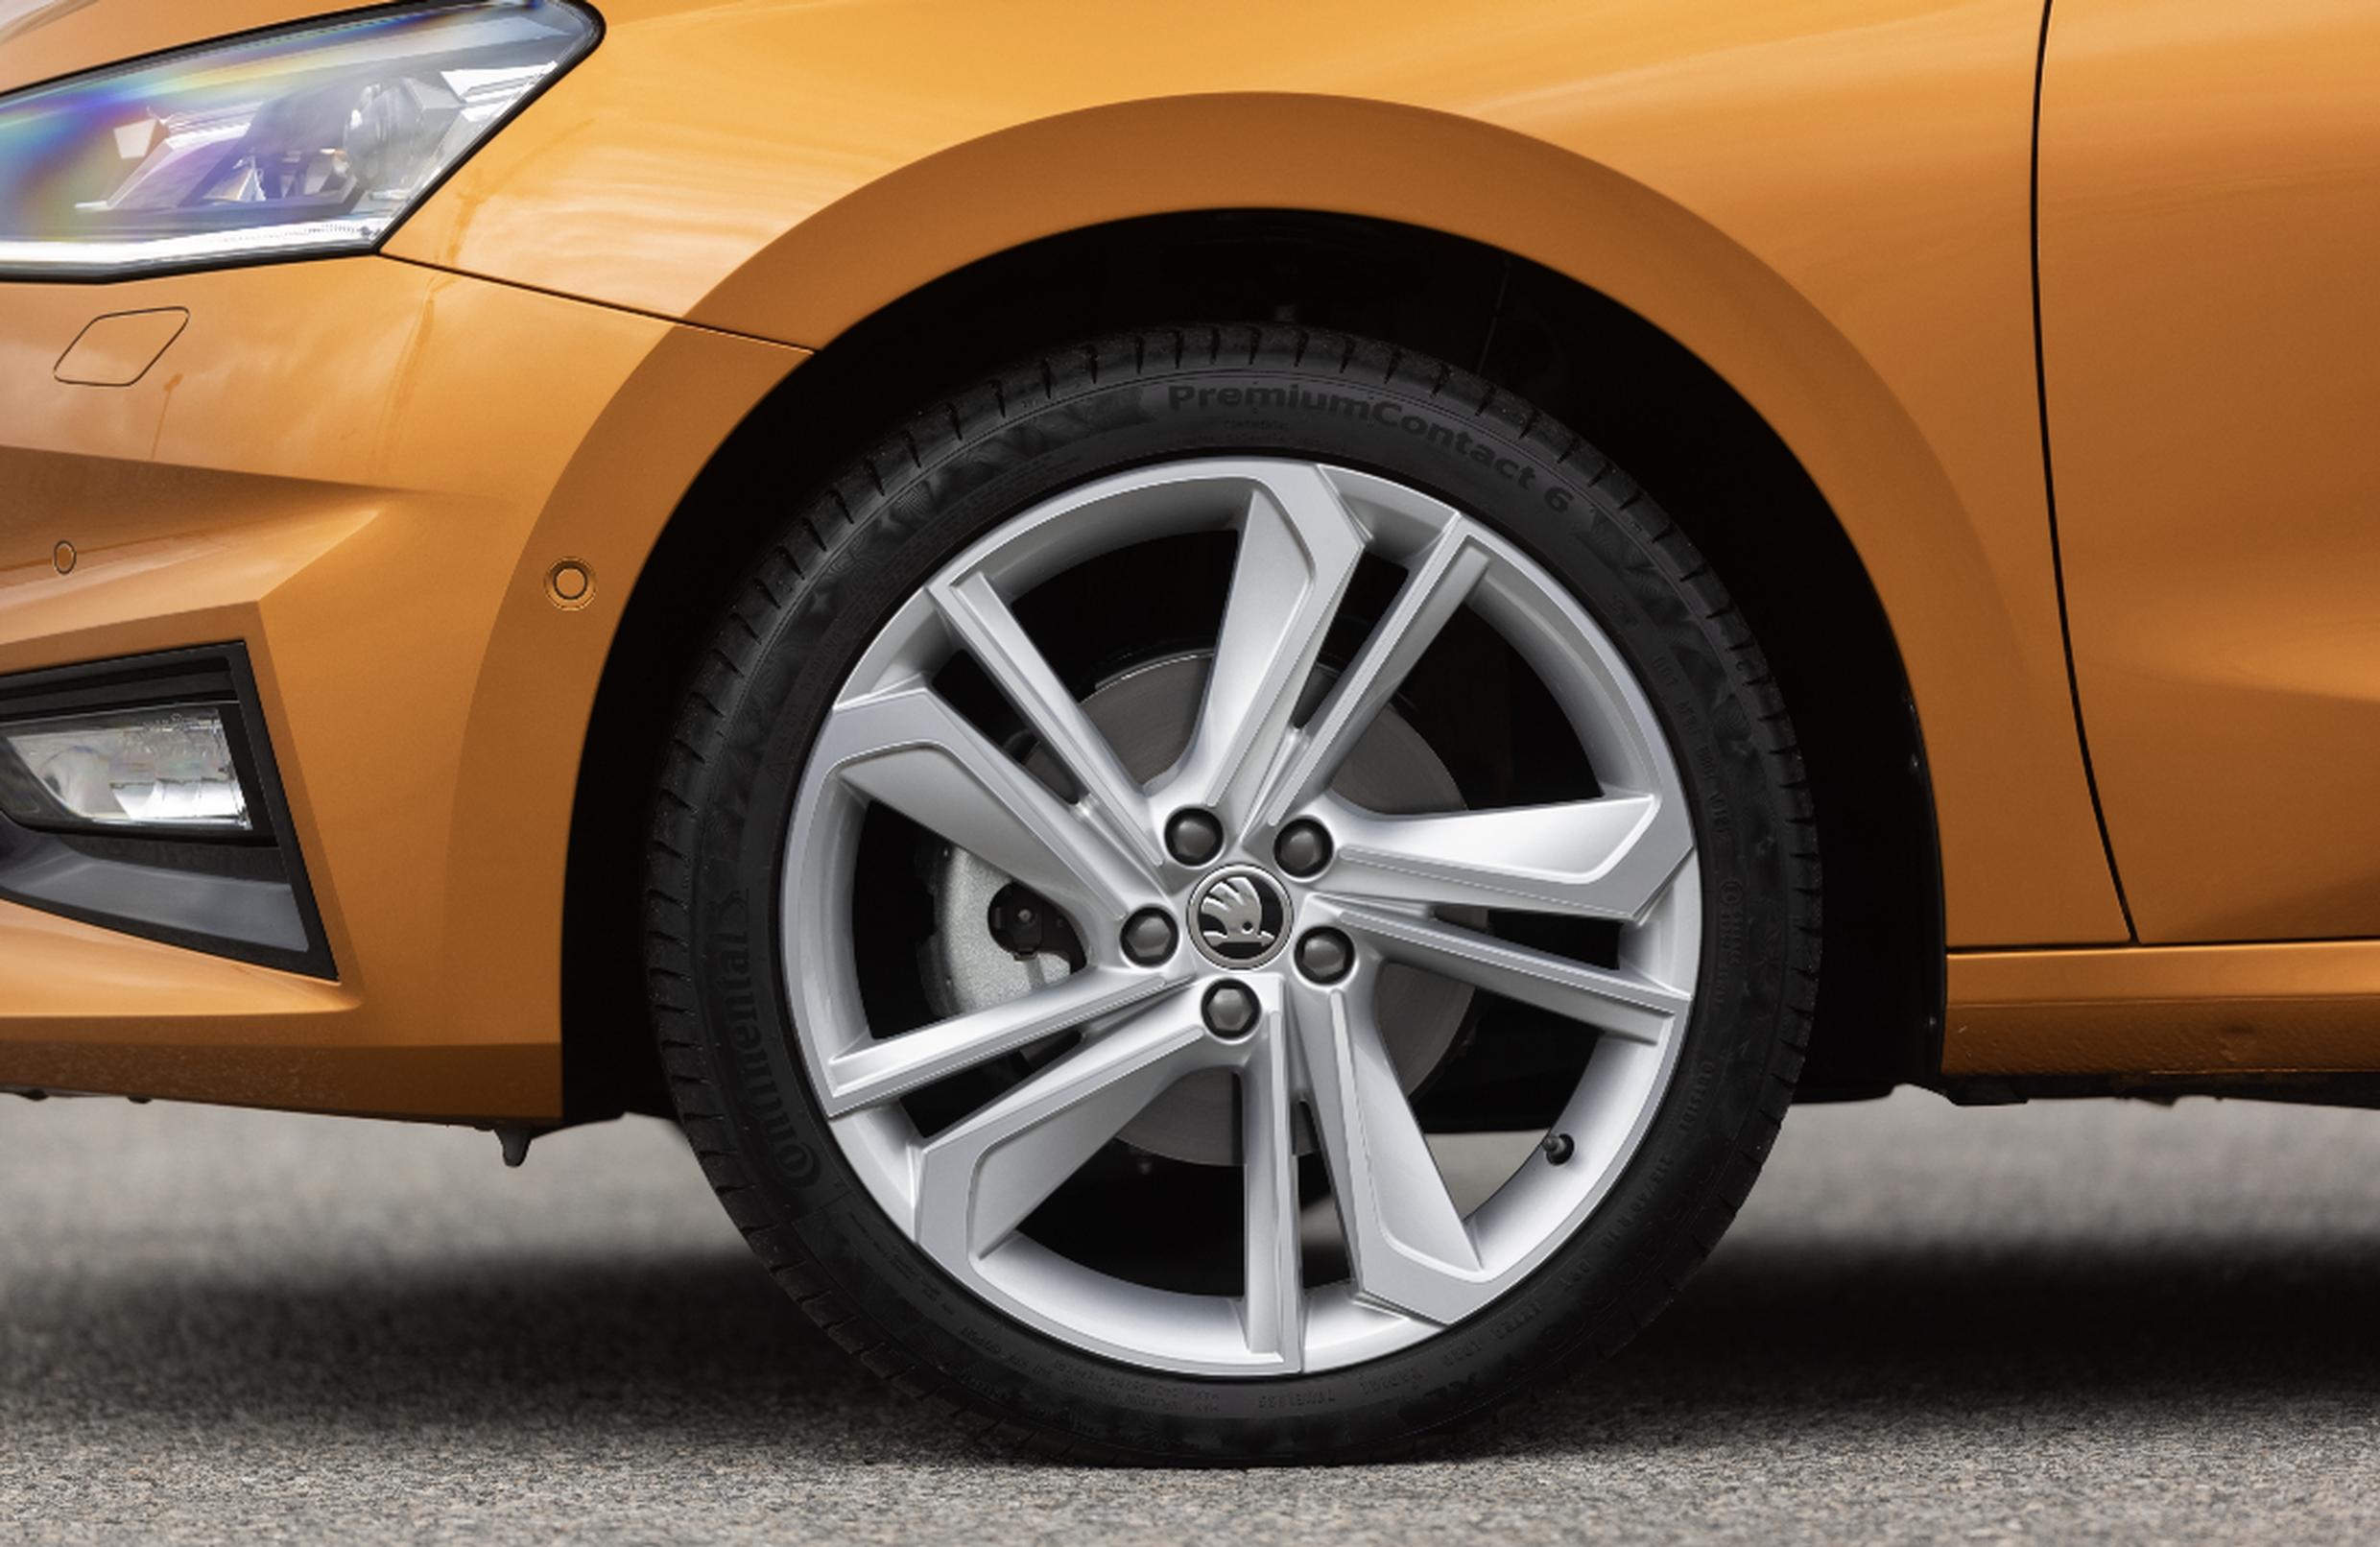 Based on an average repair price for a single alloy wheel of £67.50